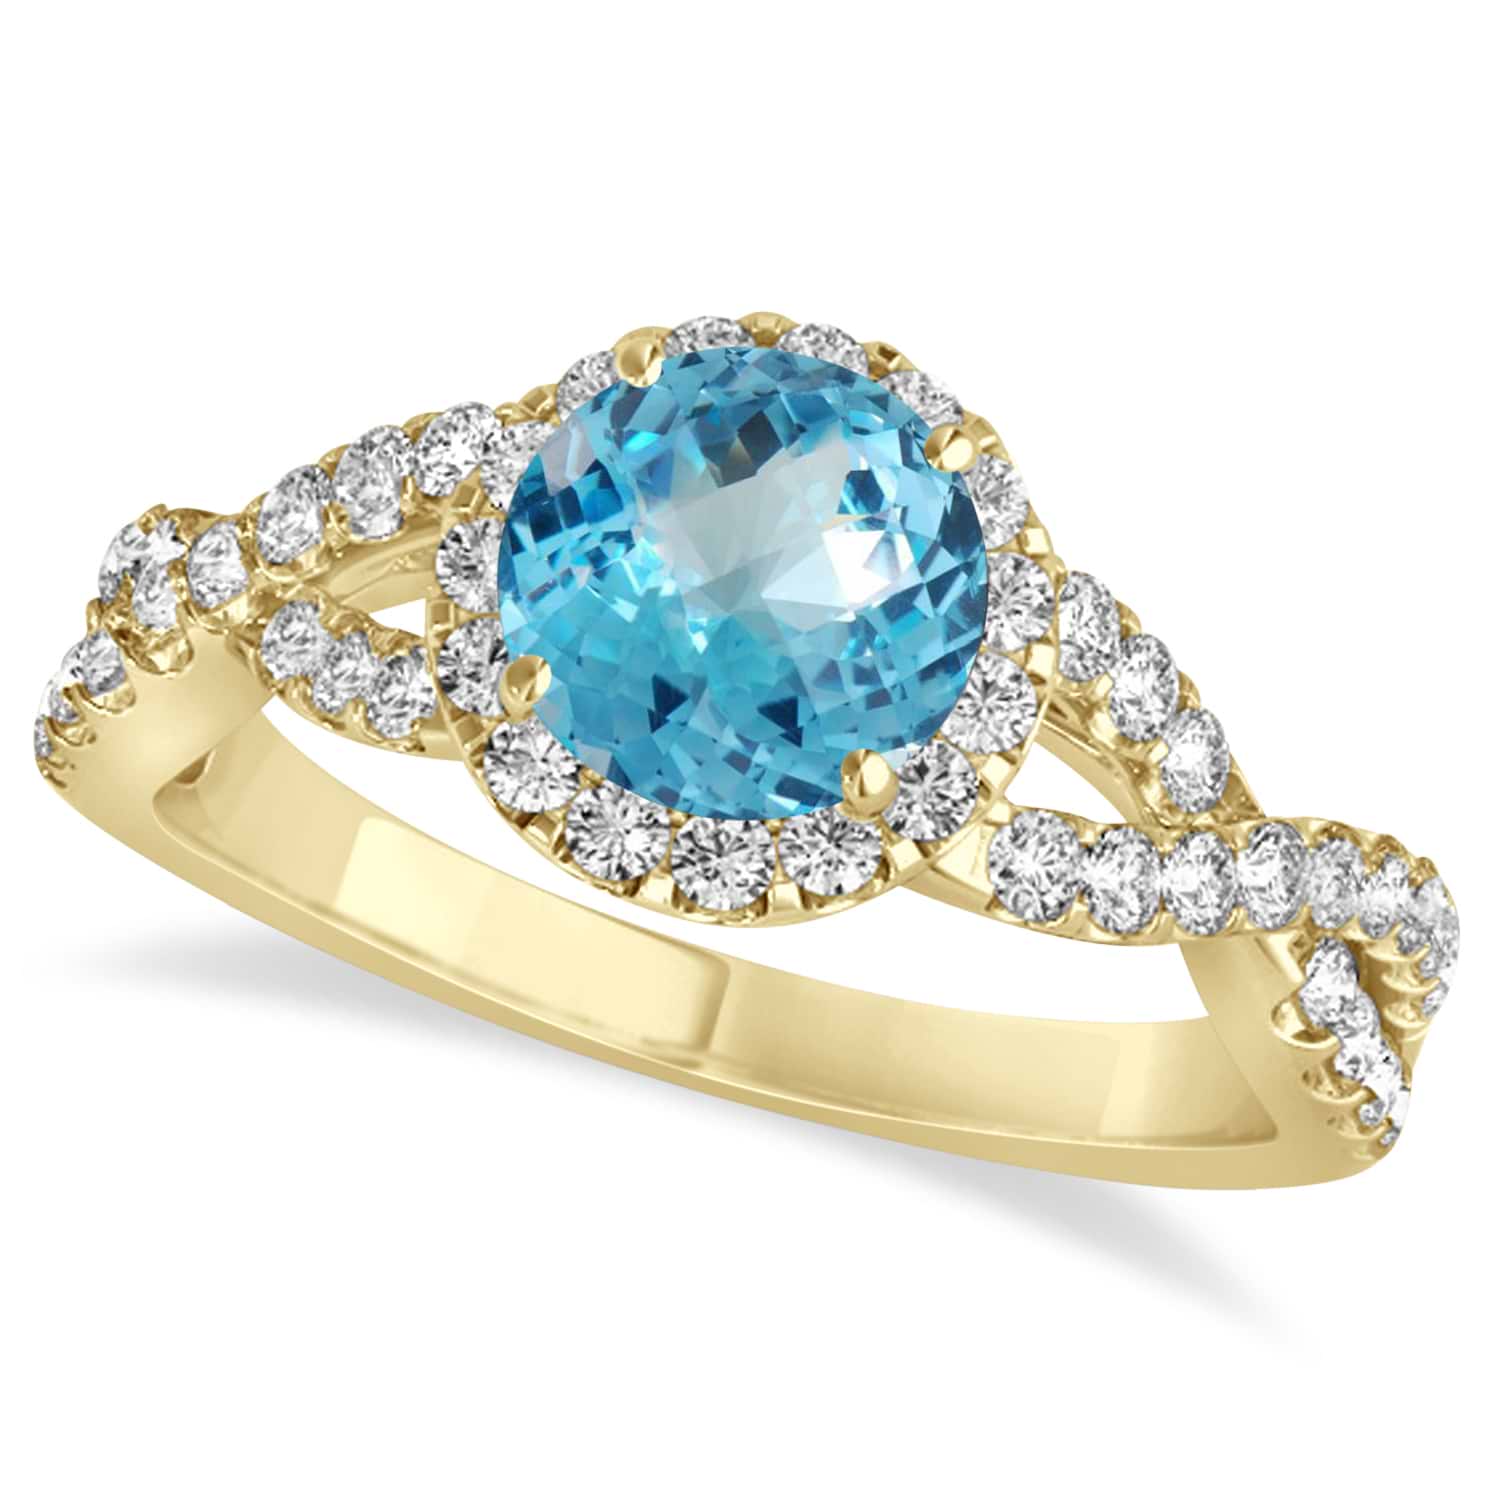 Blue Topaz & Diamond Twisted Engagement Ring 14k Yellow Gold 1.50ct